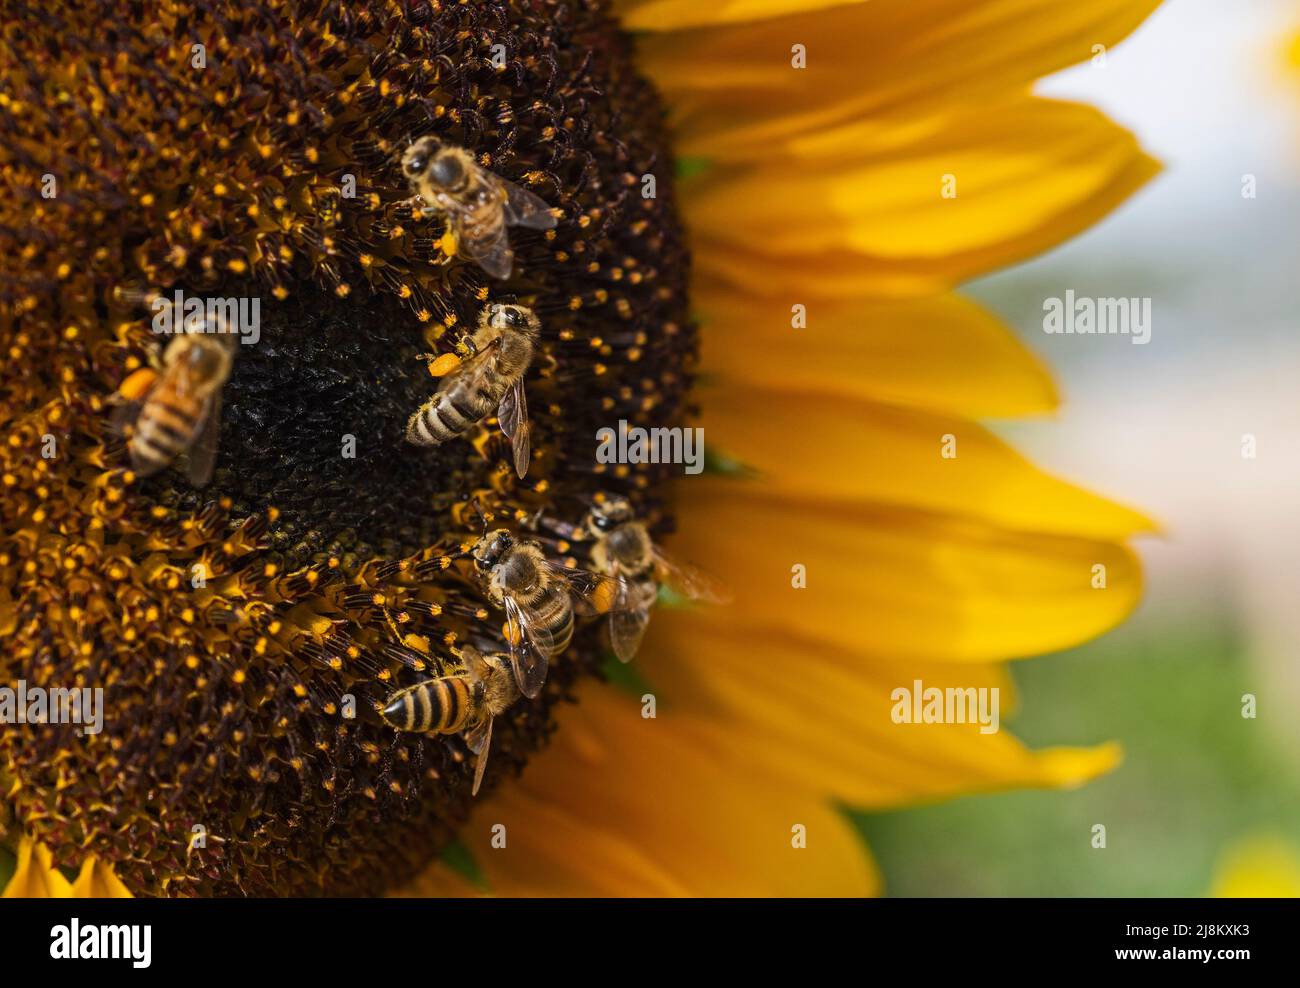 Close-up detail of a yellow sunflower hellanthus annuus honey bee apis collecting pollen in garden Stock Photo